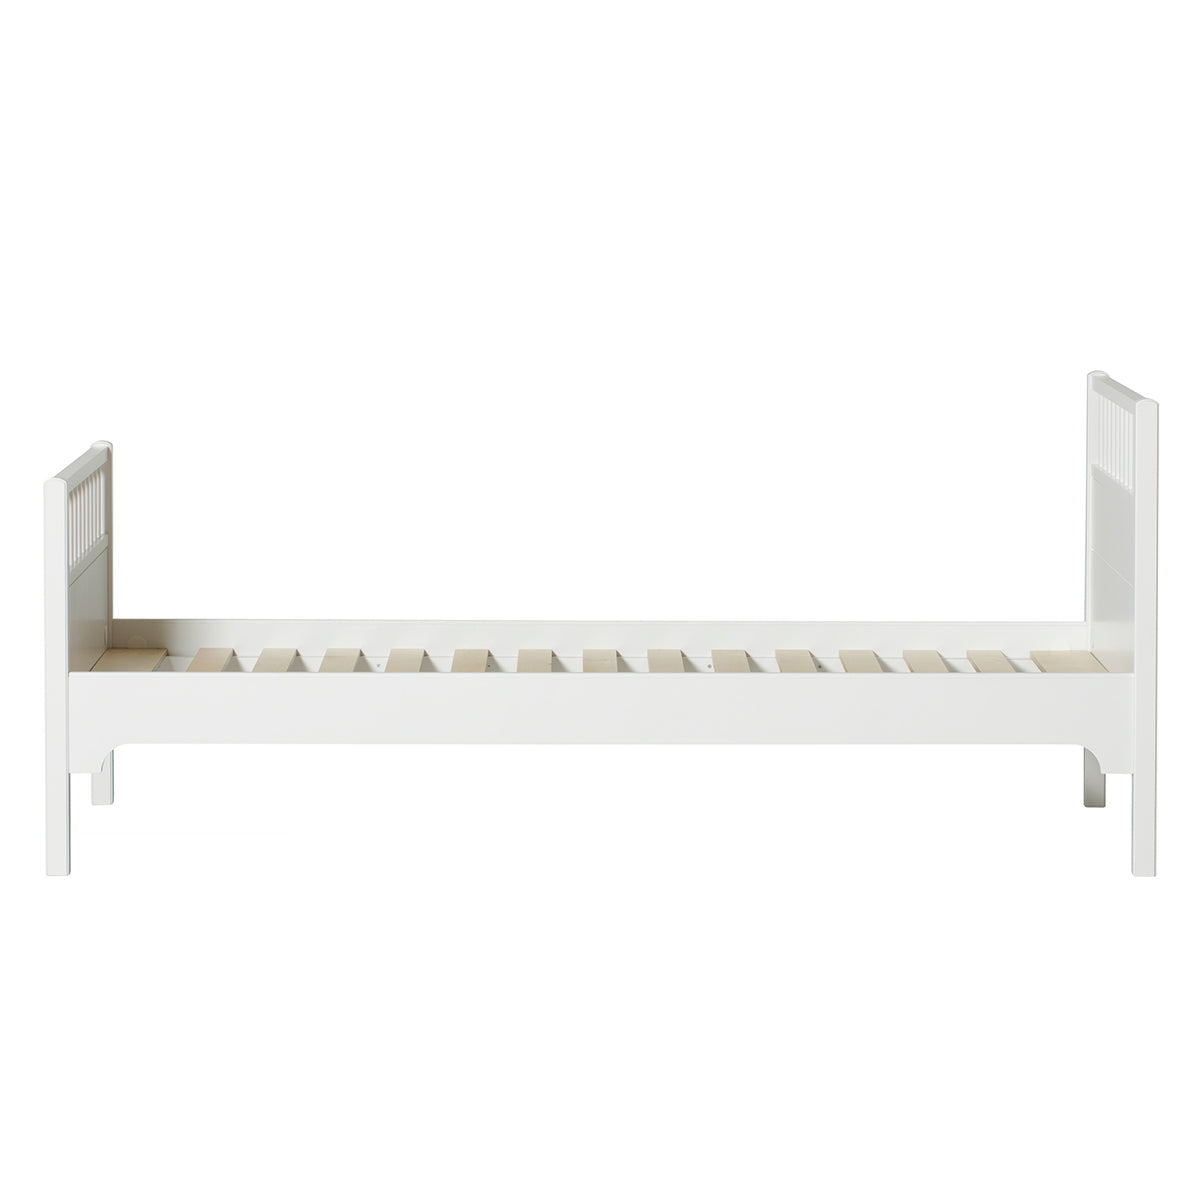 Oliver Furniture Seaside Classic single bed, 90 x 200cm, white